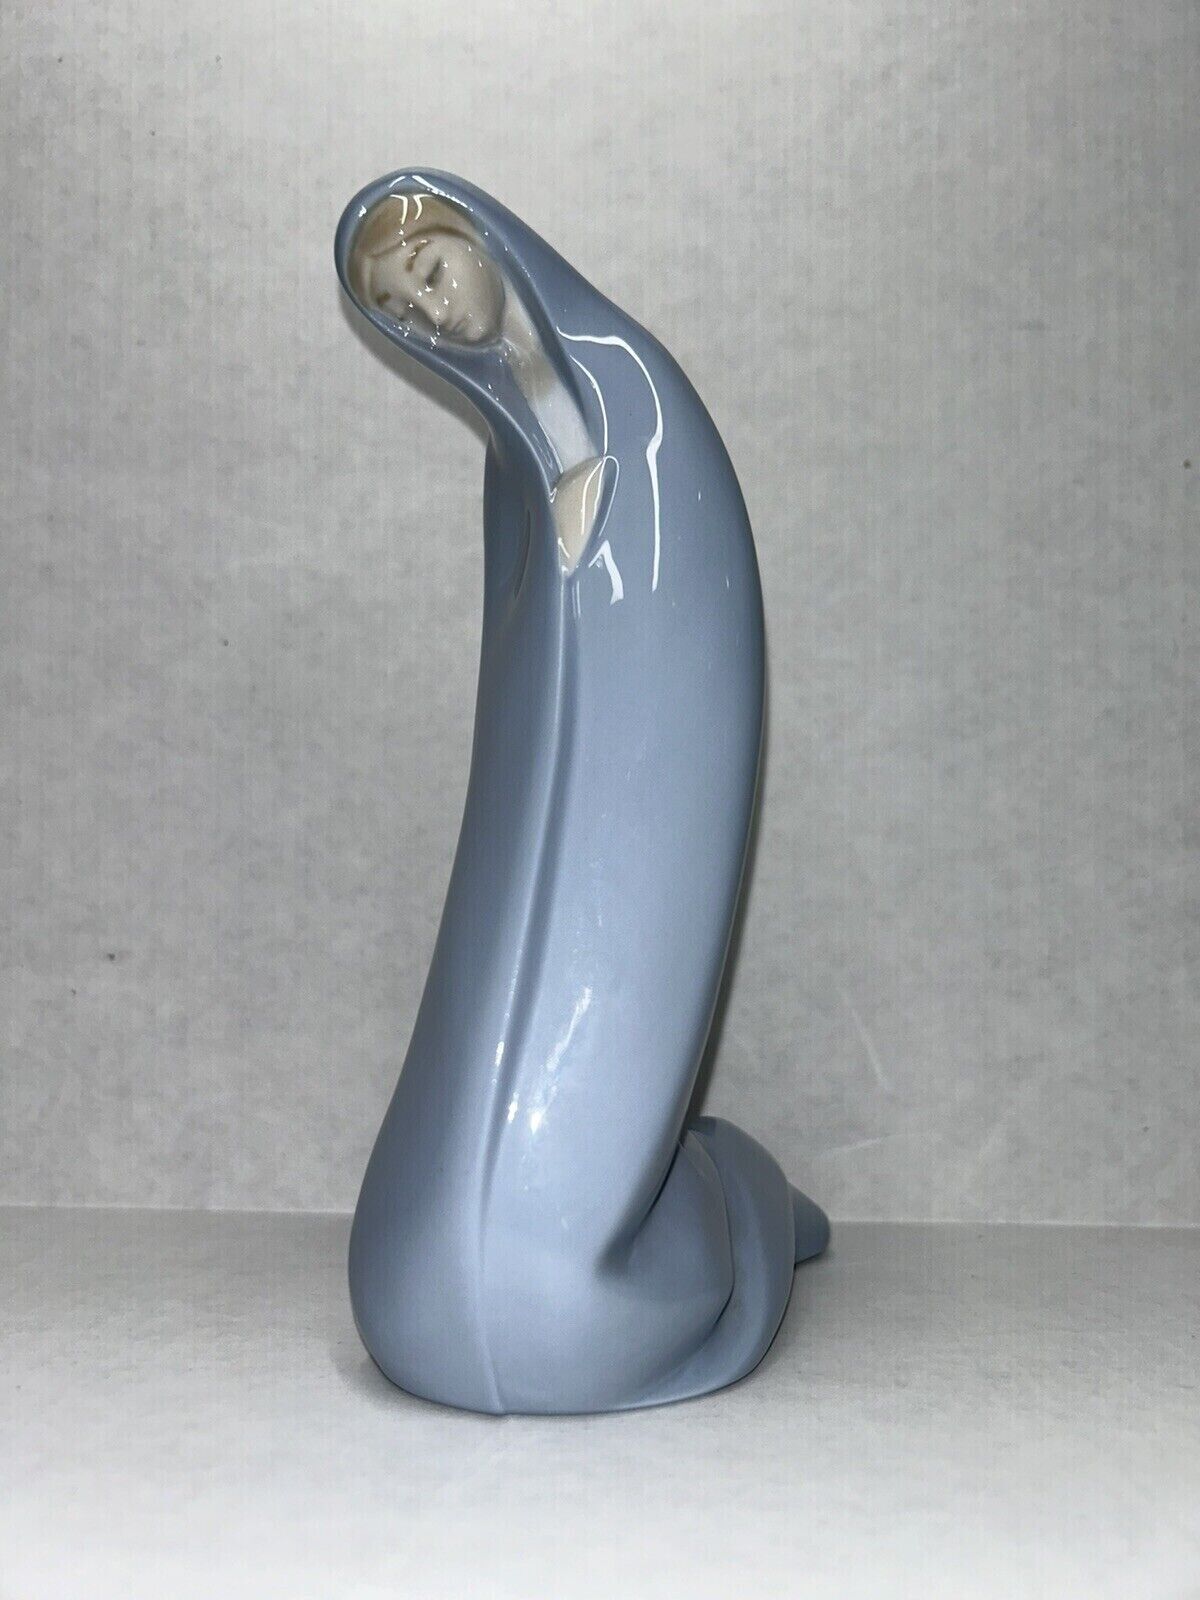 LLADRO PORCELAIN VIRGIN MARY MADONNA FIGURINE NATIVITY. Excellent In Box